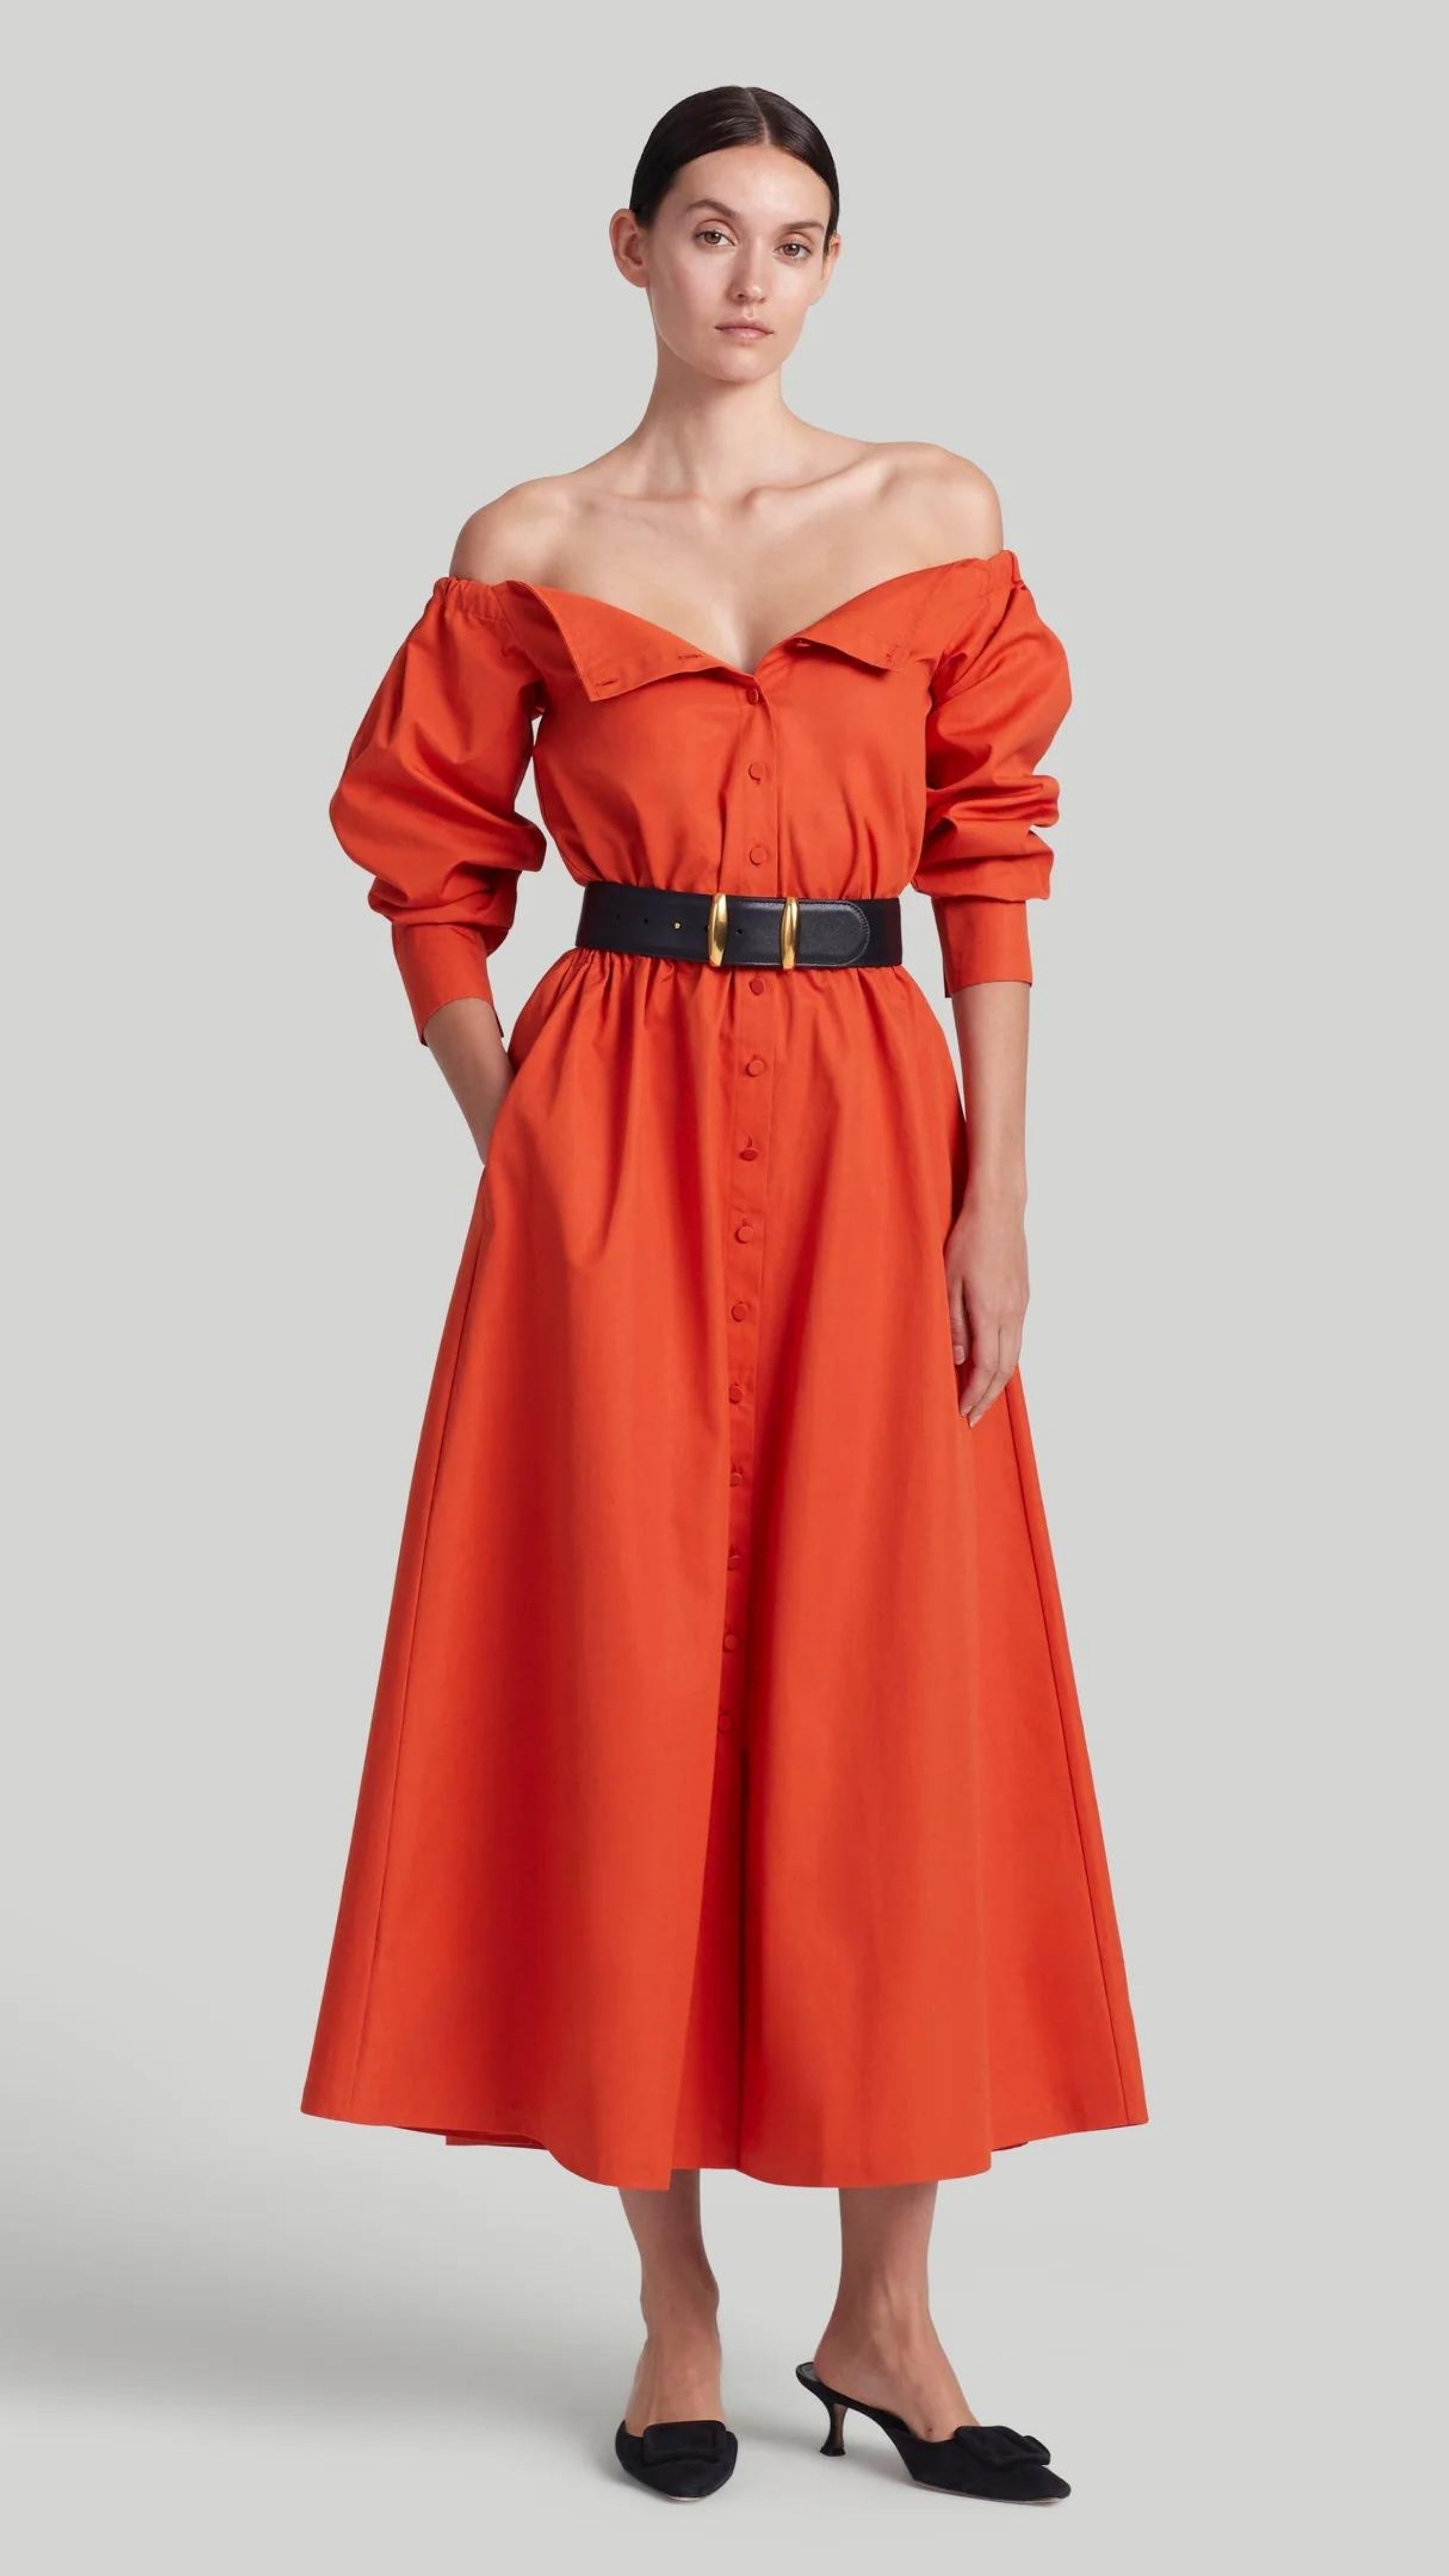 Altuzarra Zora dress shirt dress style soft cotton midi dress in red orange color. Made in Italy. The dress has off the shoulder neckline, puff sleeves and an elasticated waist waistband. Shown on model facing front